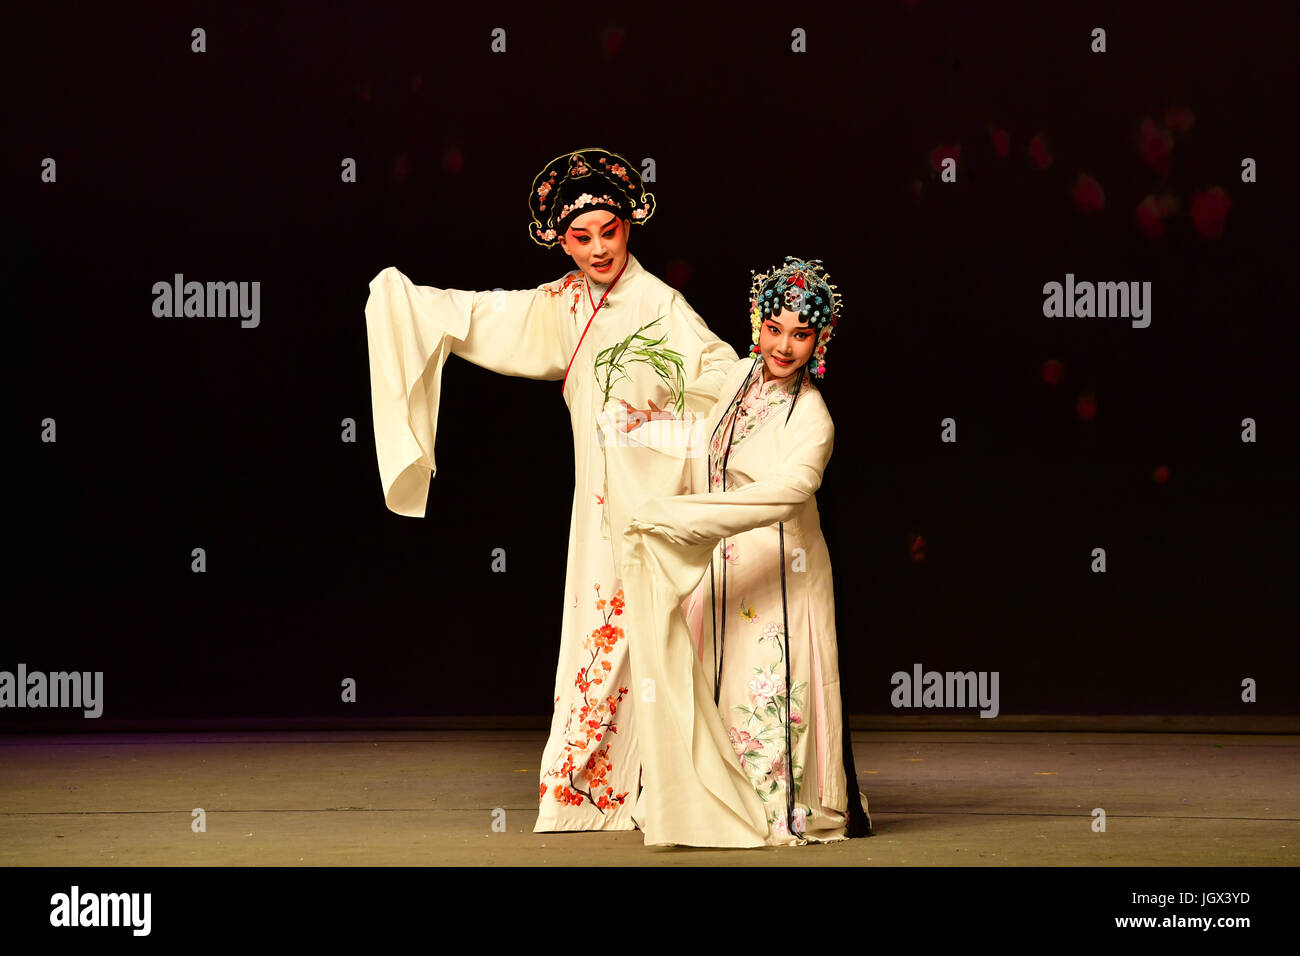 (170711) -- ZHENGZHOU, July 11, 2017 (Xinhua) -- Troupers of the Northern Kunqu Opera Theatre perform Kunqu Opera 'the Peony Pavilion' in Zhengzhou, capital of central China's Henan Province, July 9, 2017. 'Peony Pavilion', created by ancient Chinese playwrite Tang Xianzu (1550-1616), tells a love story between Du Liniang and Liu Mengmei, embodying young people's pursuit of love and freedom.  (Xinhua/Feng Dapeng) (ry) Stock Photo